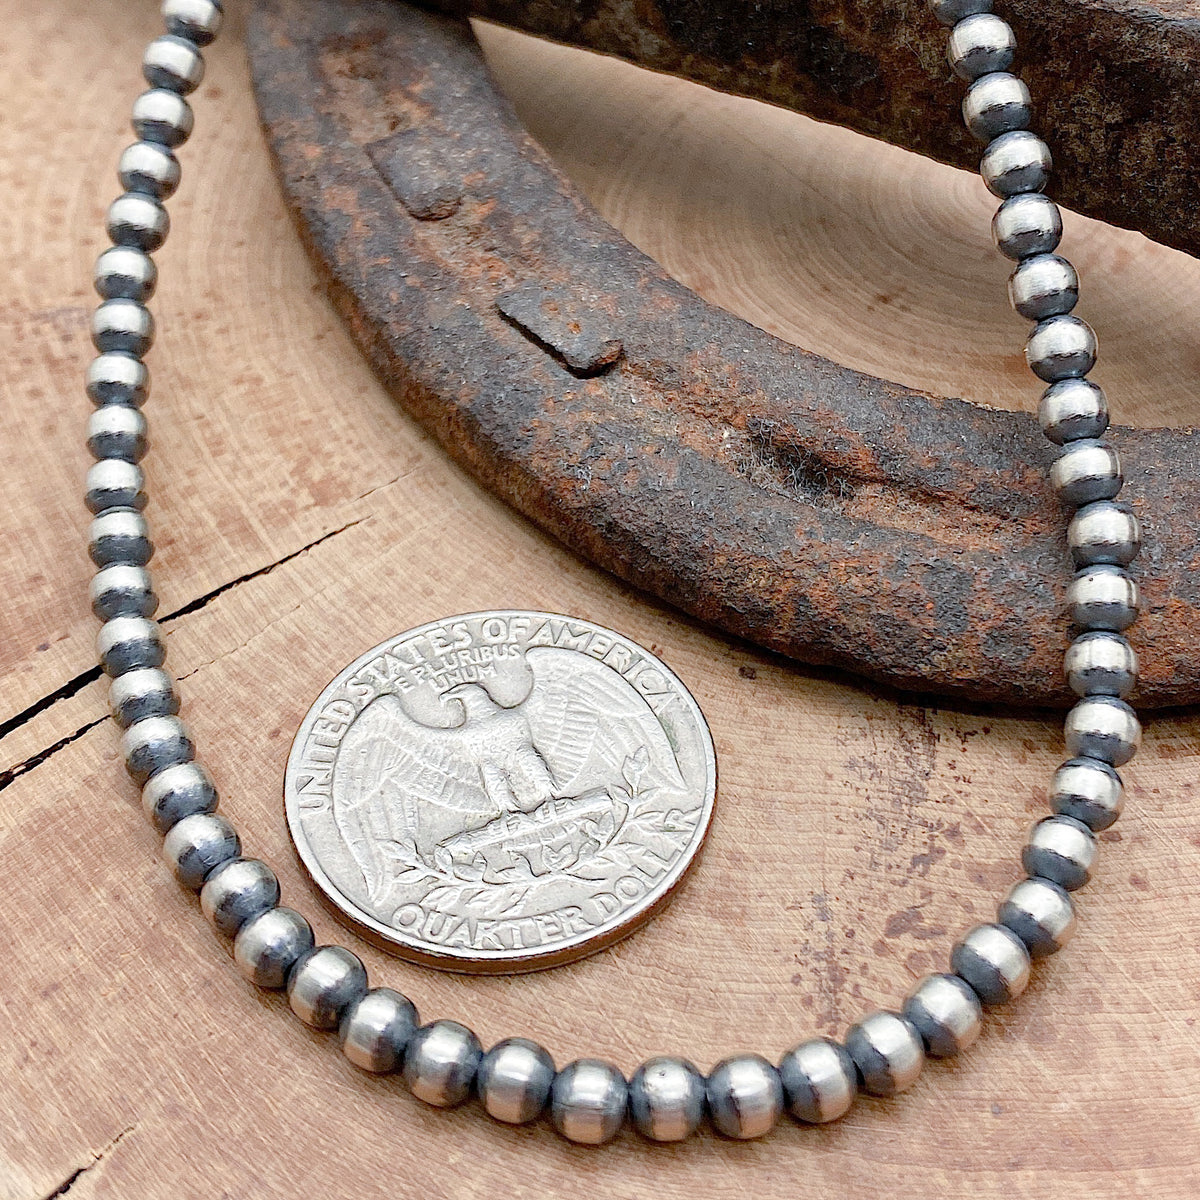 Size comparison between a US Quarter coin and a Sterling silver hand crafted necklace that features 3mm beads, an antiqued finish and has a hook and eye clasp.